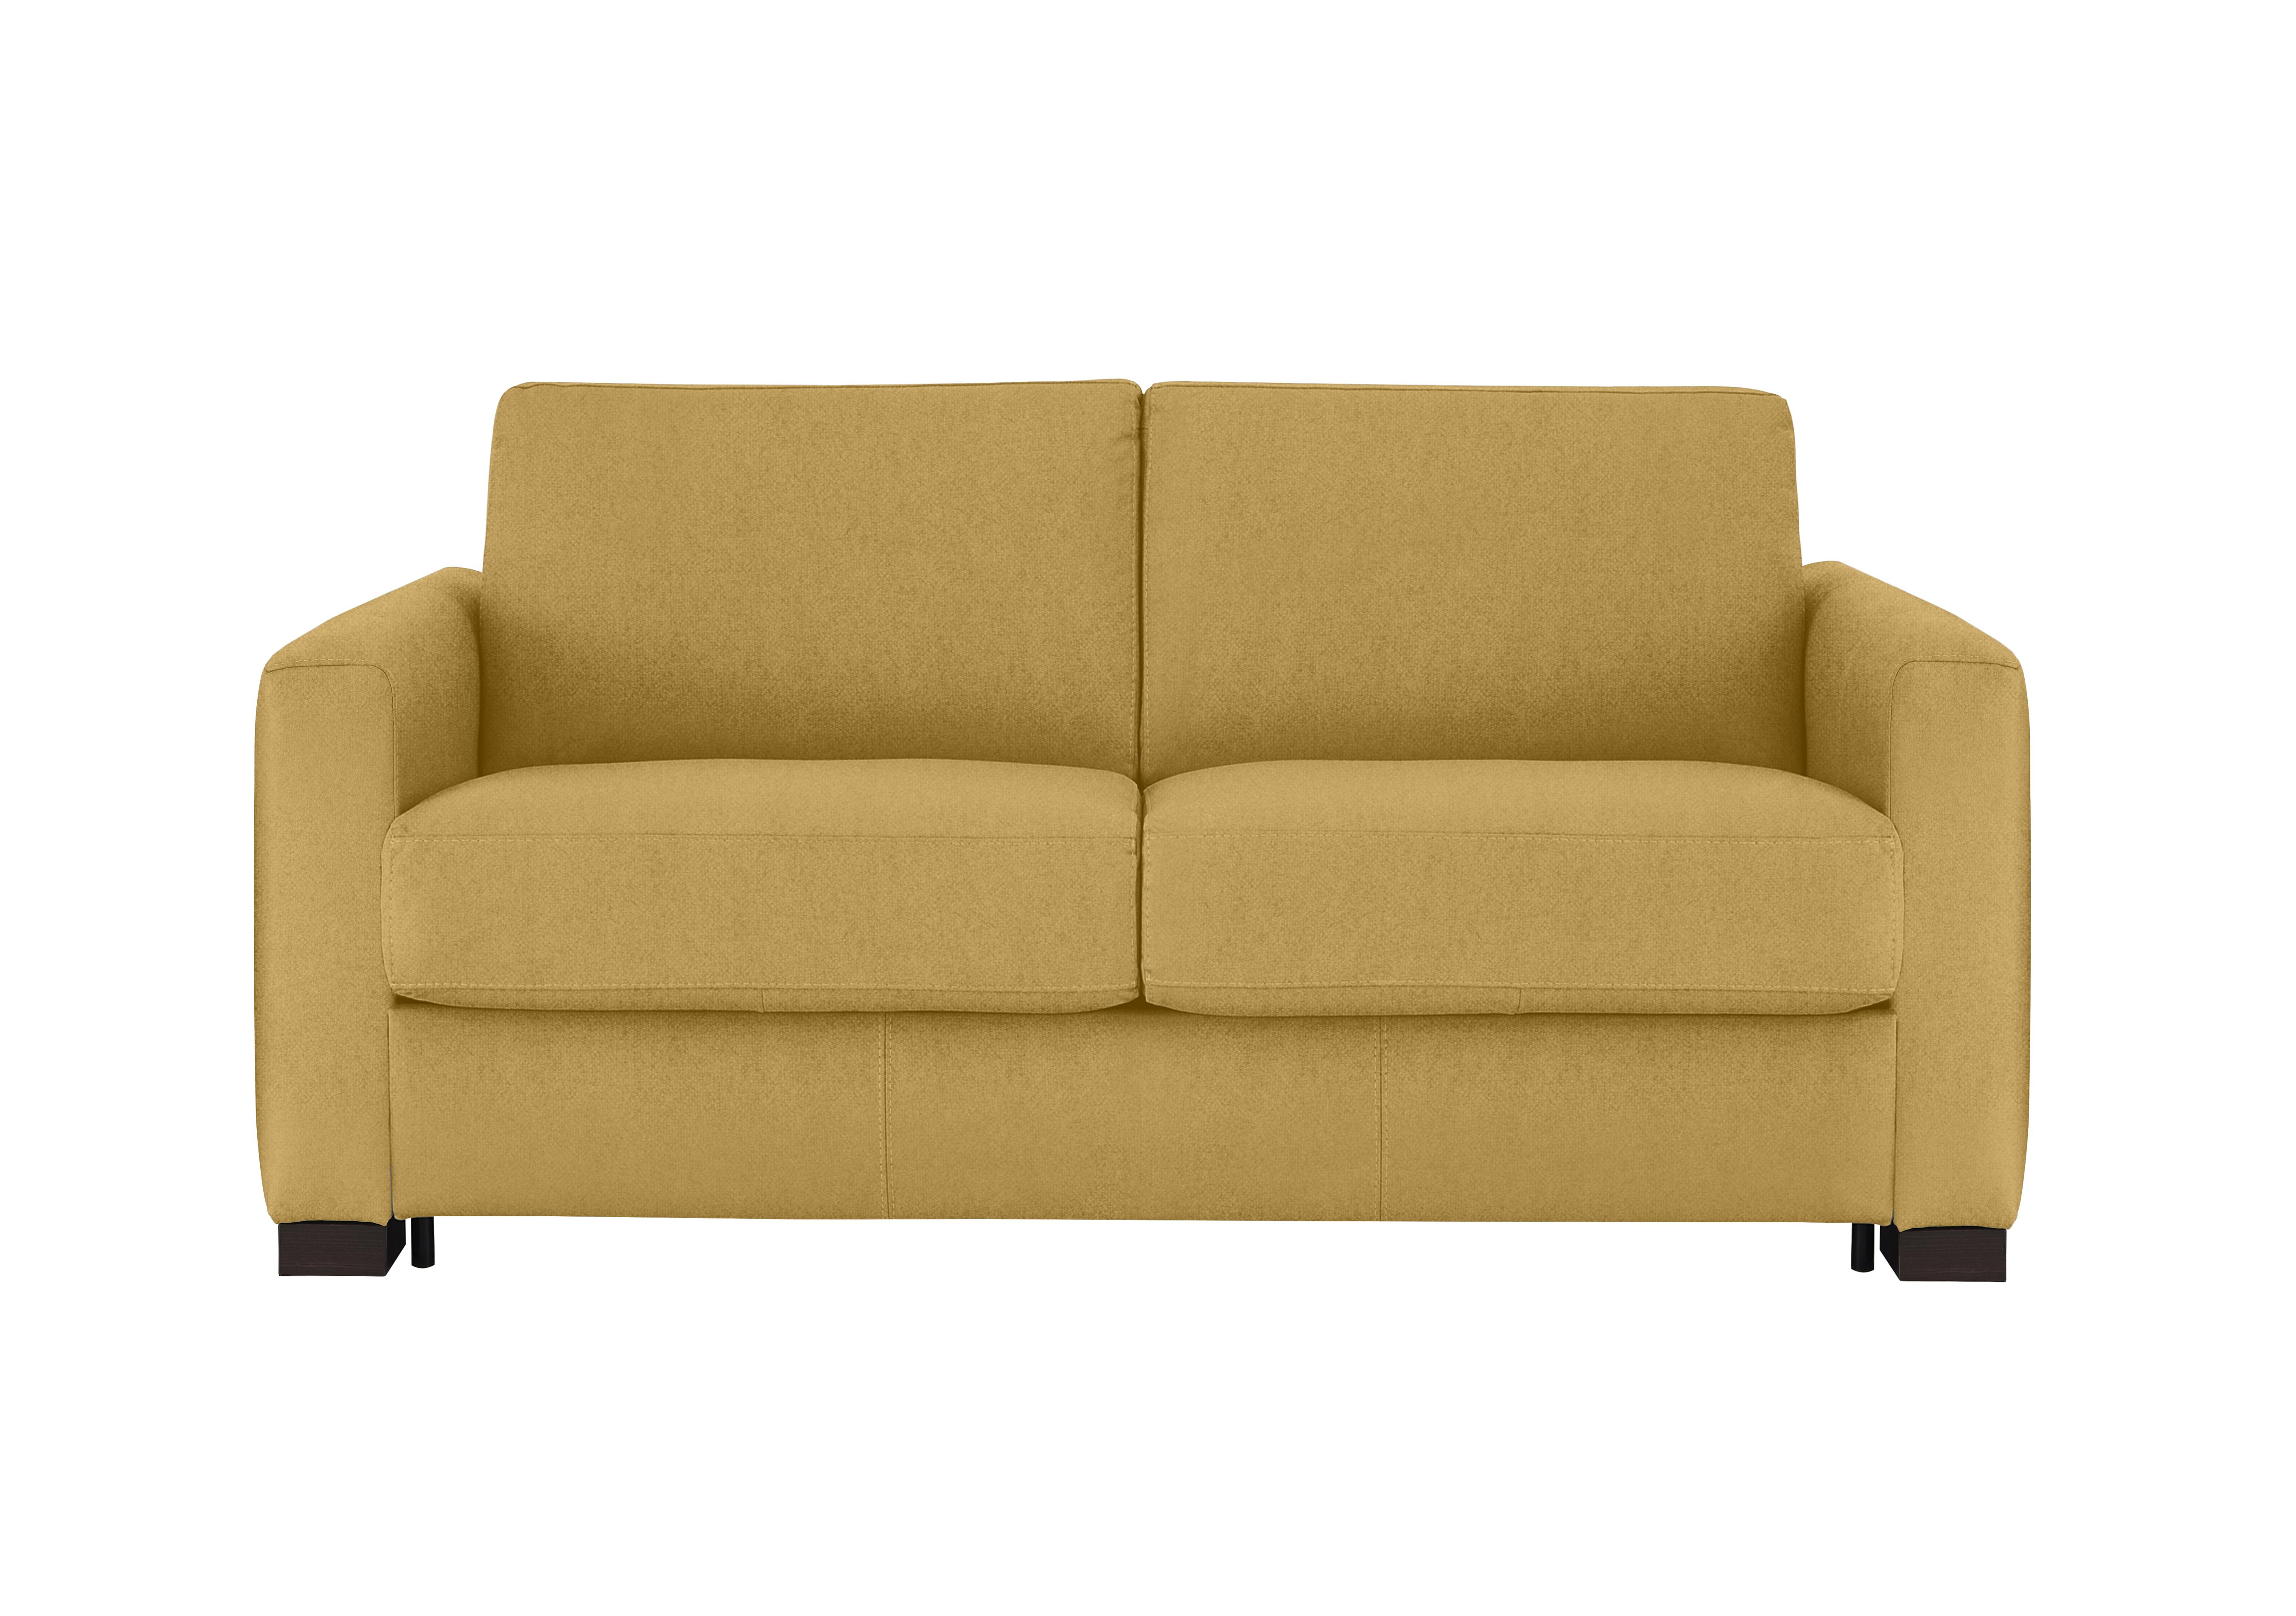 Alcova 2 Seater Fabric Sofa Bed with Box Arms in Fuente Mostaza on Furniture Village